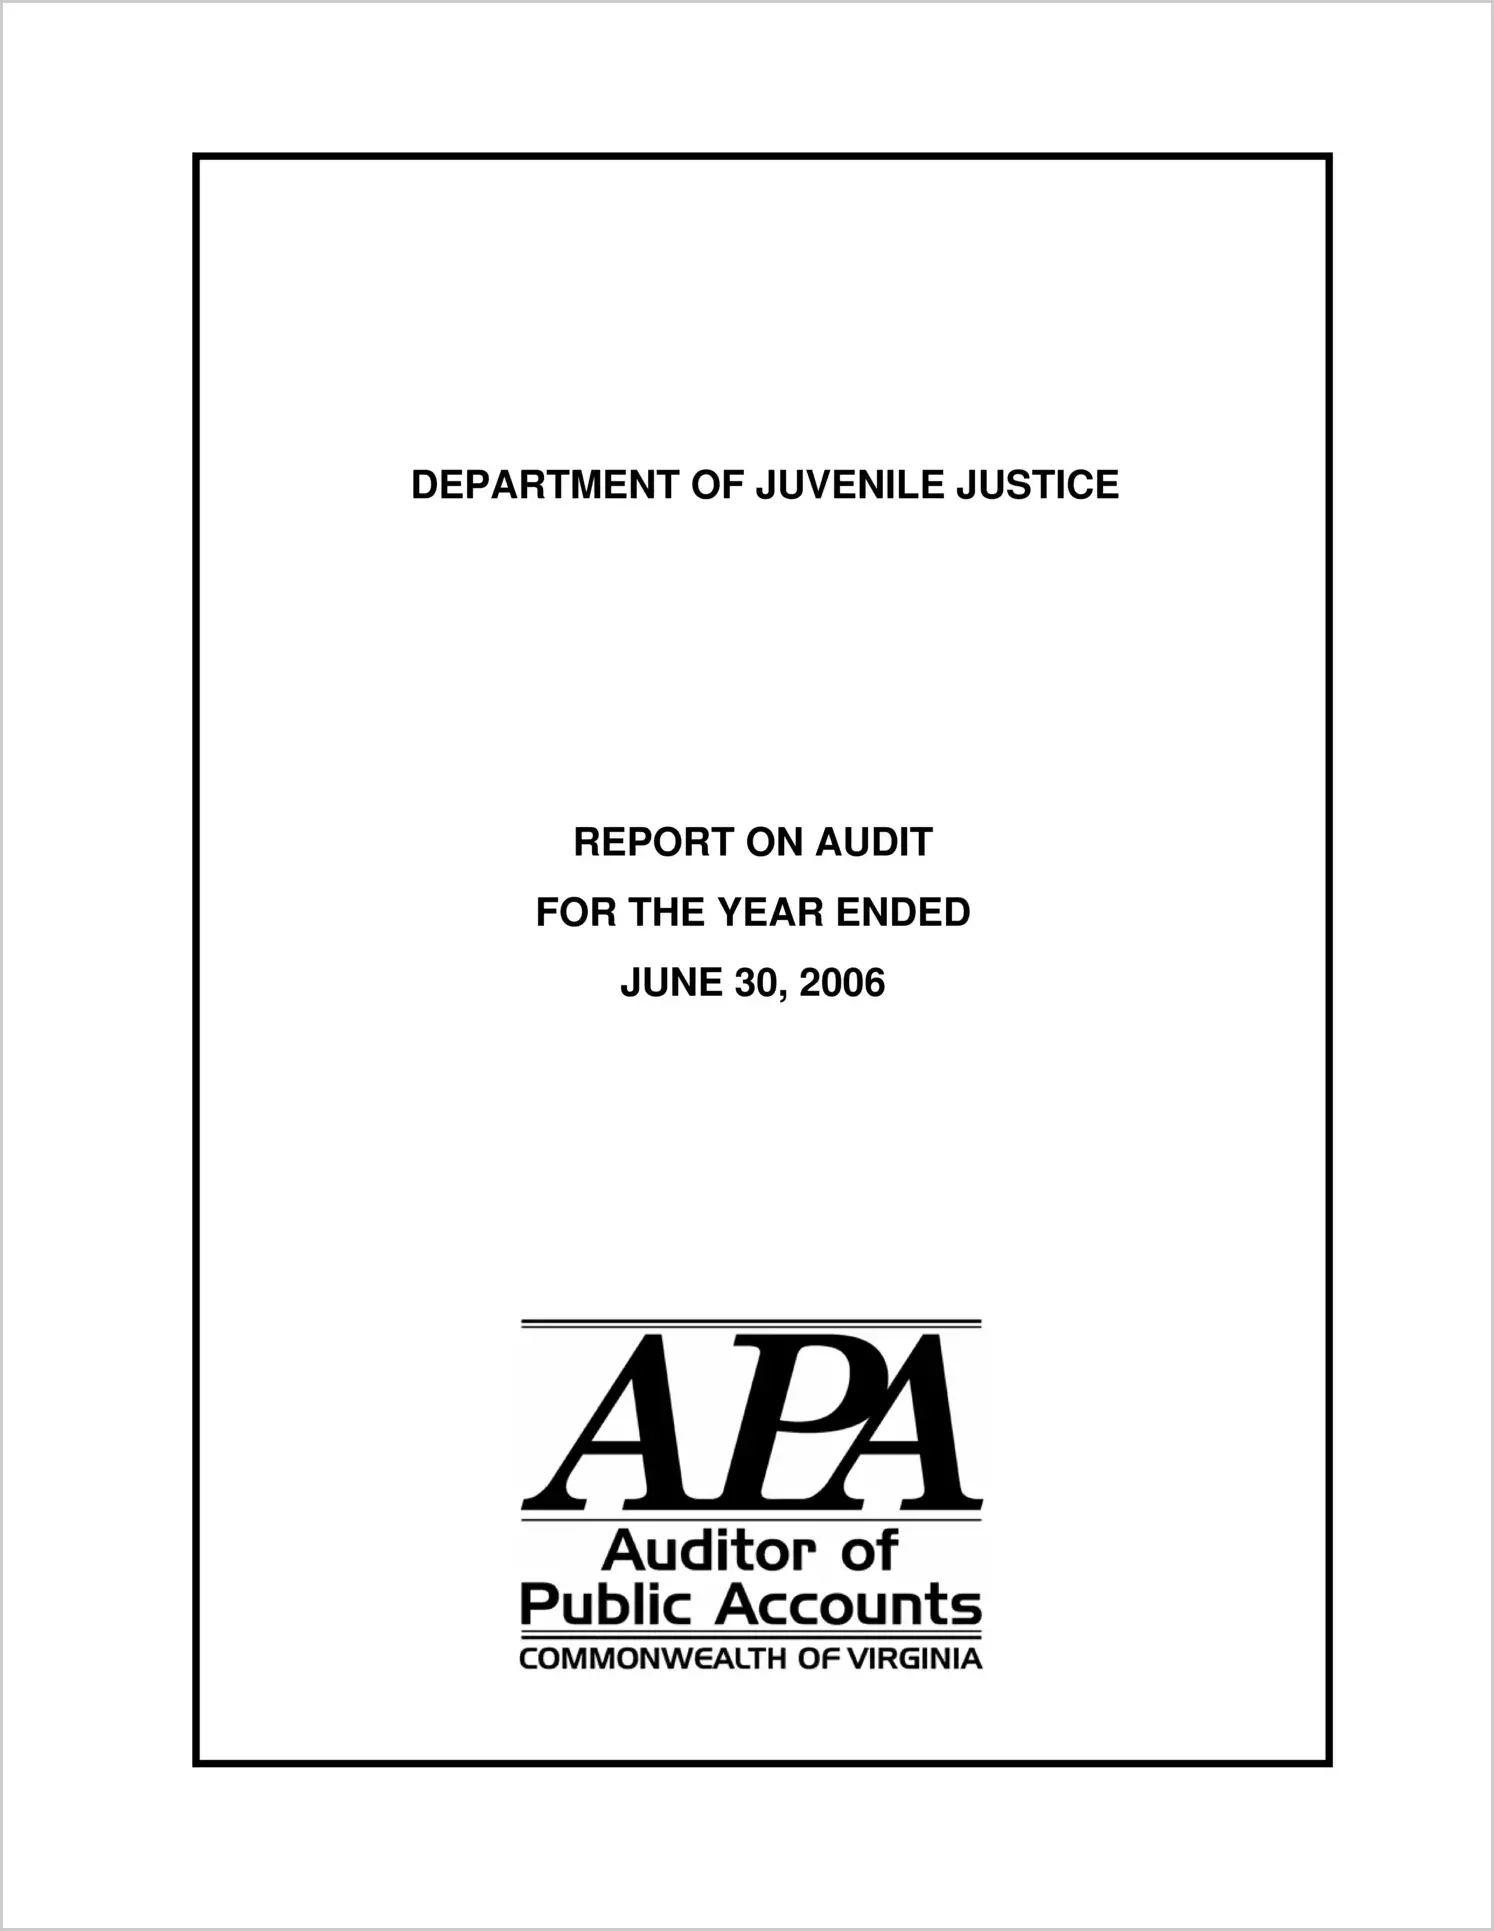 Department of Juvenile Justice for the year ended June 30, 2006